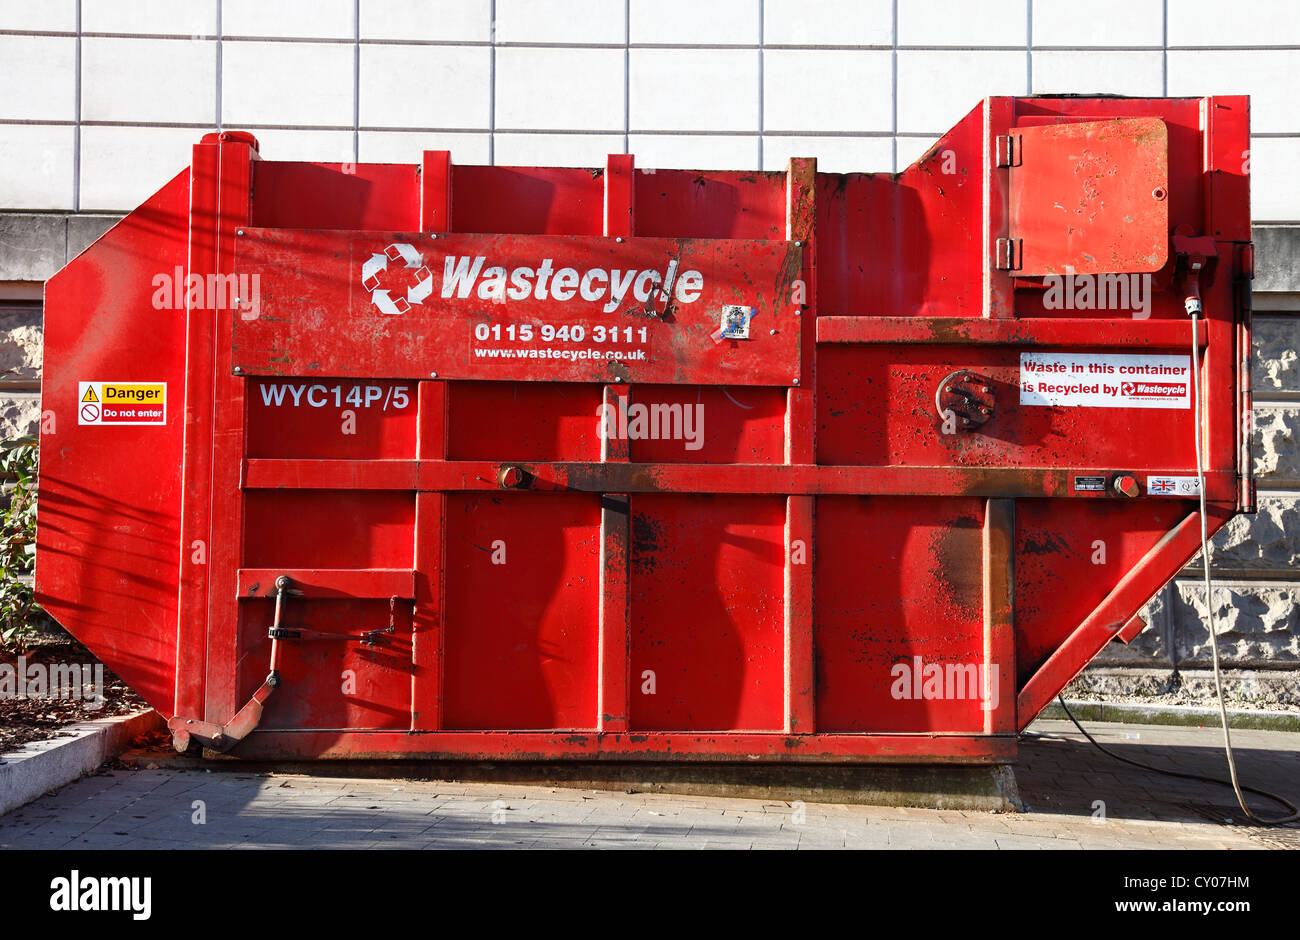 A Wastecycle skip. Stock Photo